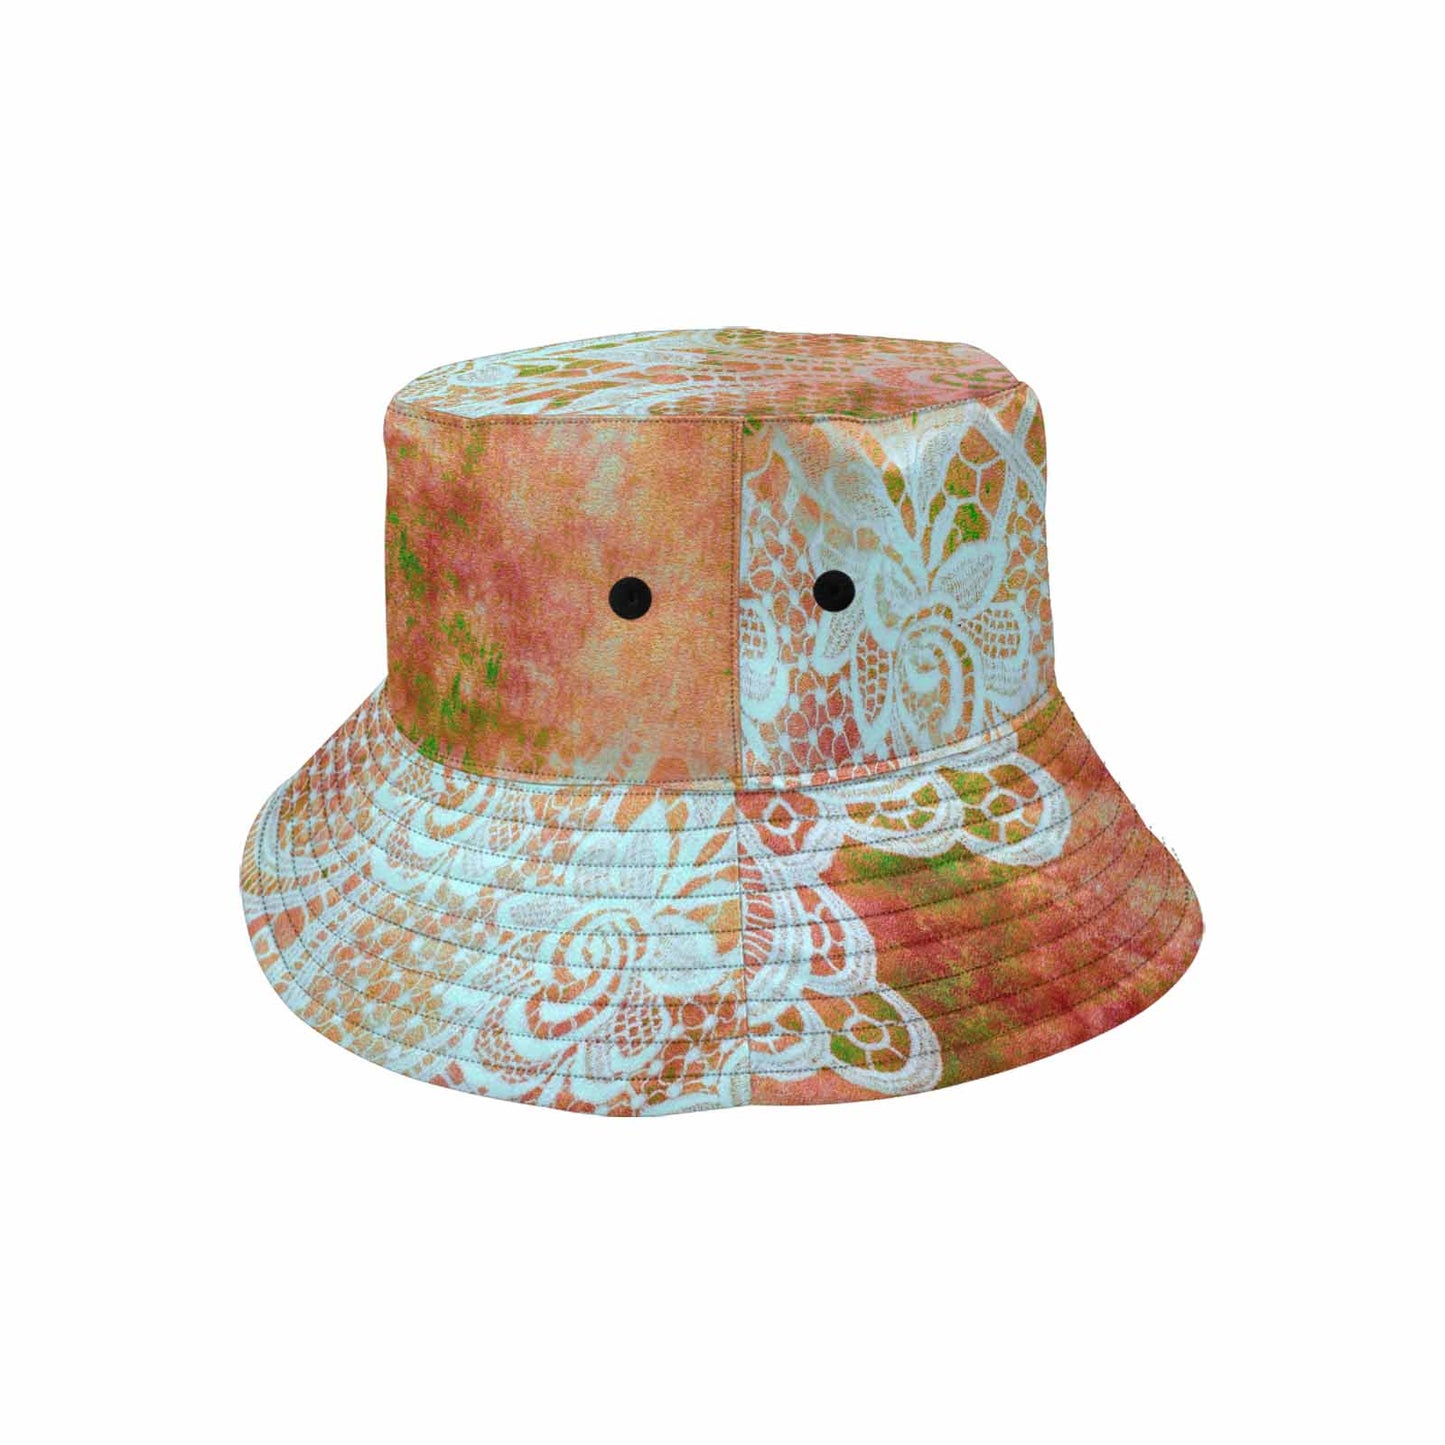 Victorian lace Bucket Hat, outdoors hat, design 31